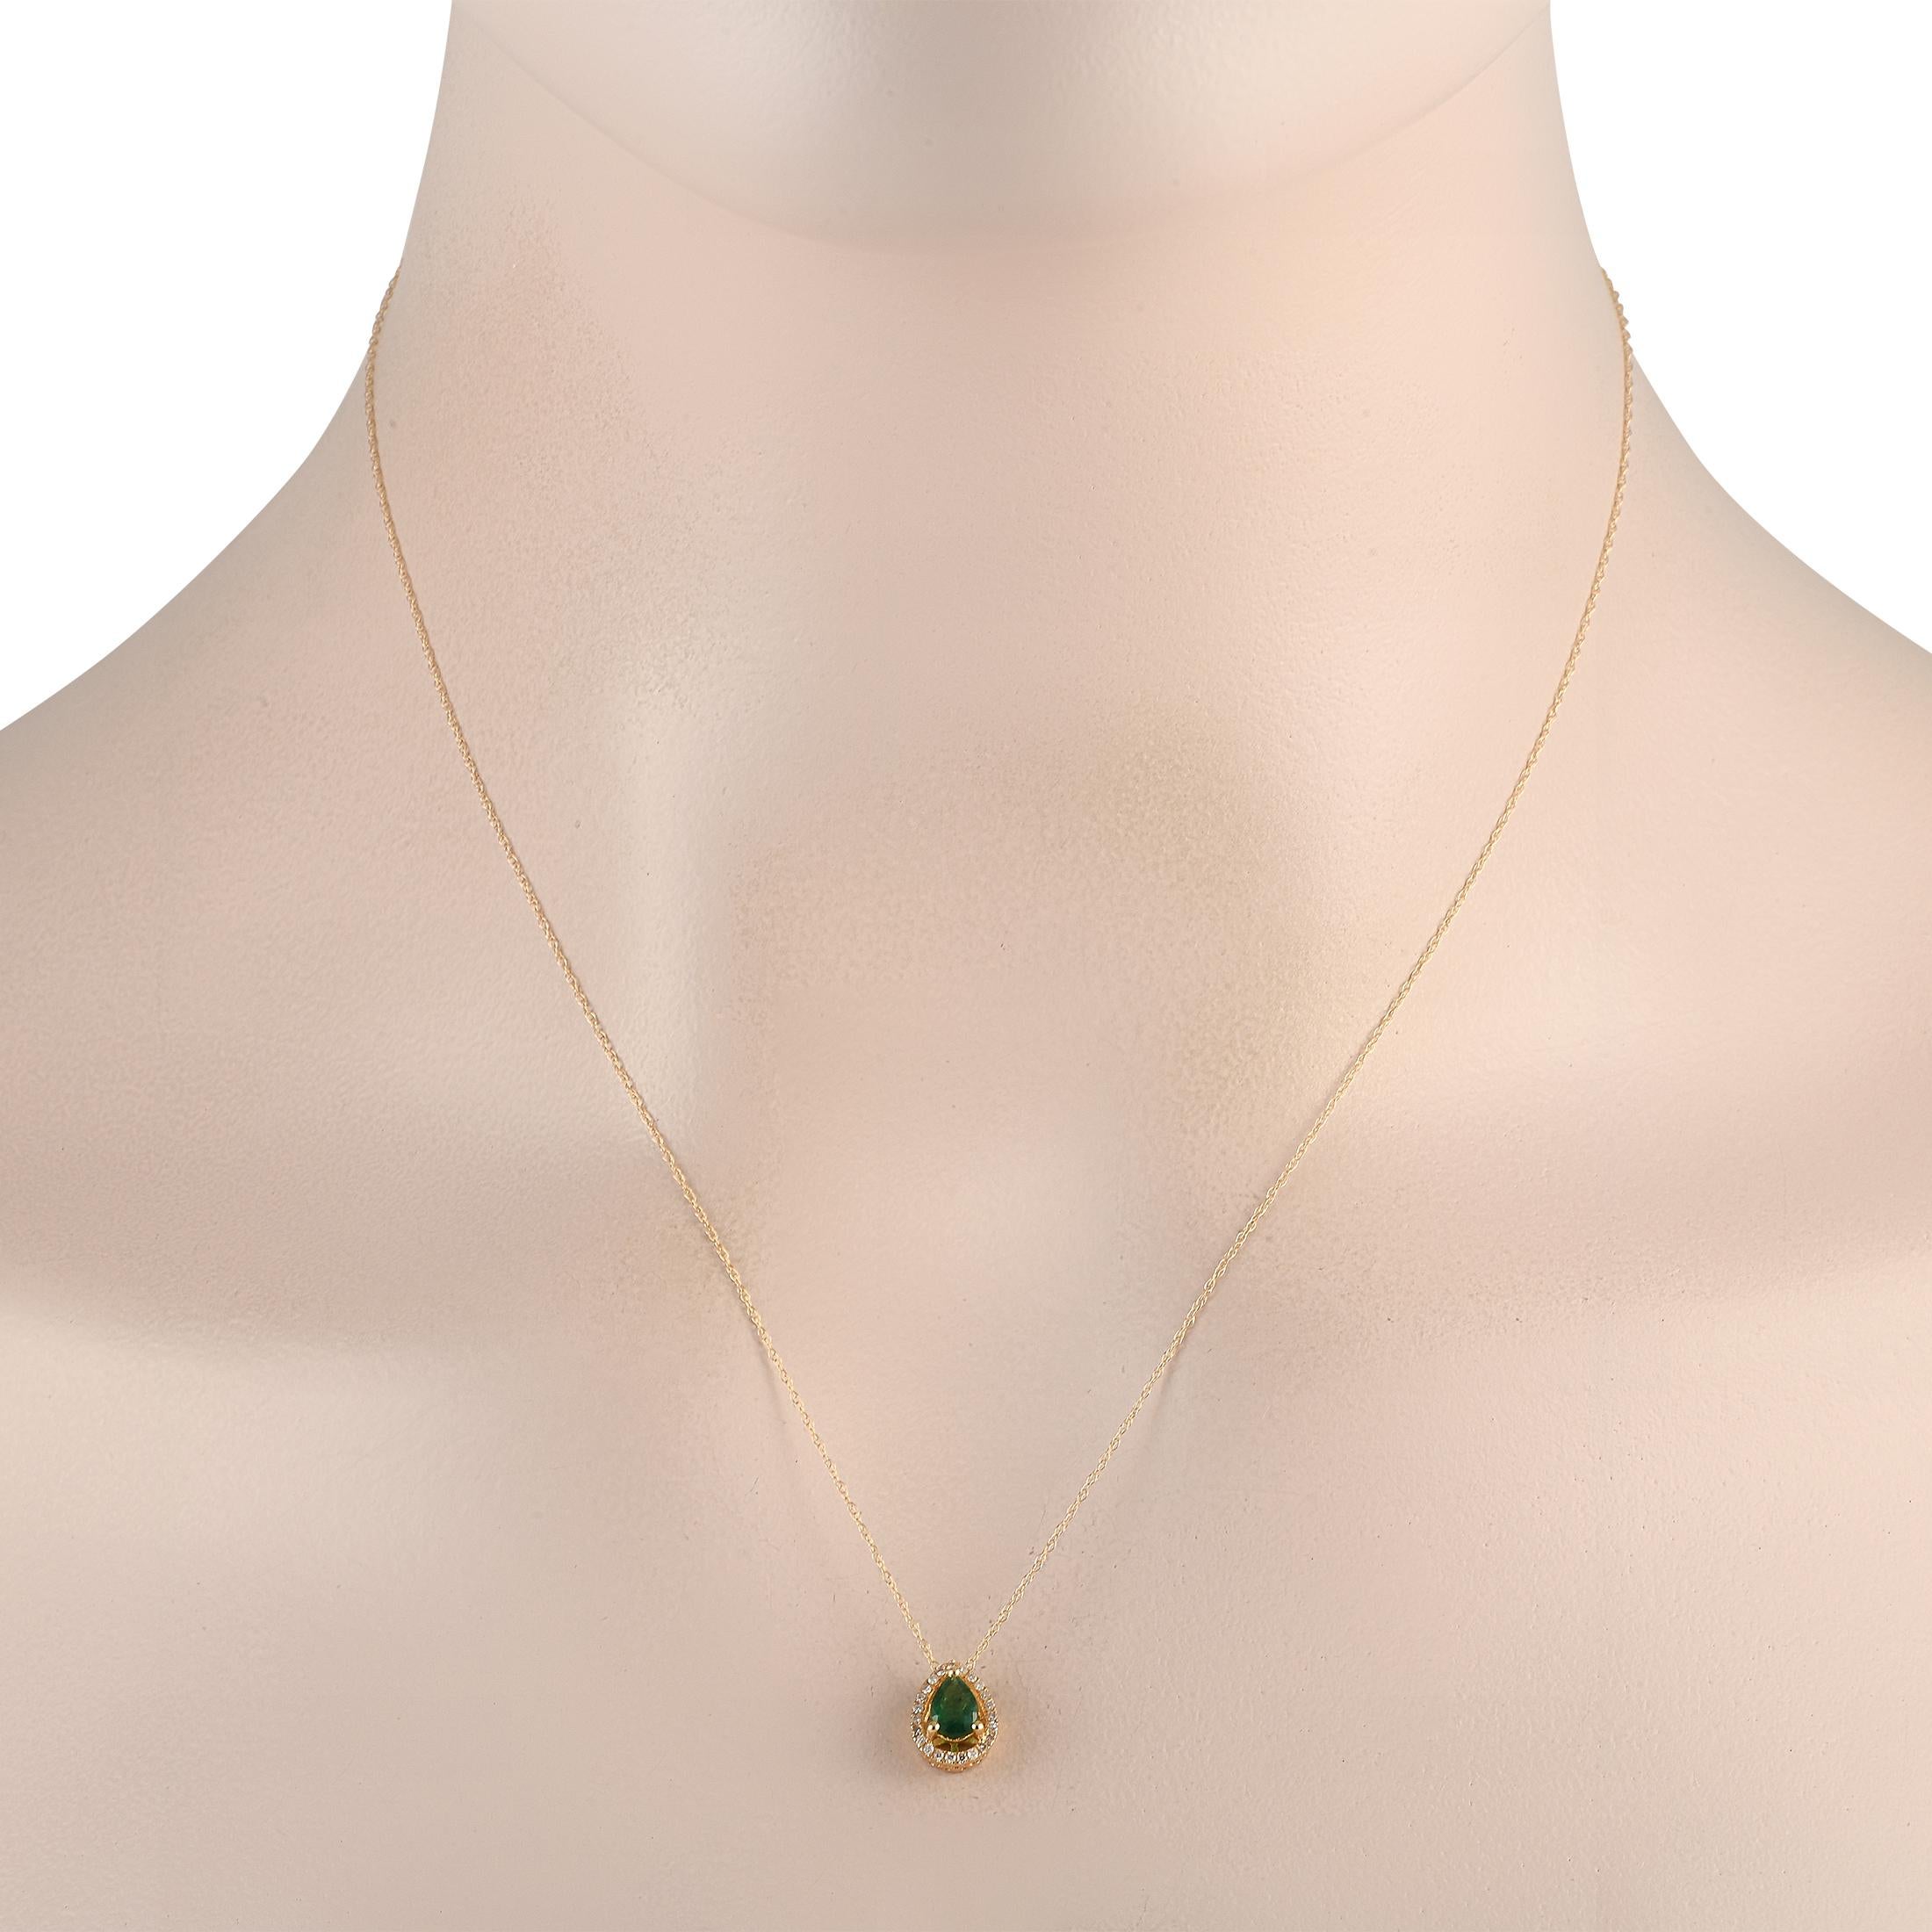 Here is an incredibly lightweight and attractive piece of jewelry that can upgrade your looks in an instant. This LB Exclusive necklace features a delicate cable chain holding a pear-shaped pendant measuring 0.45 by 0.25. The pendant beats a